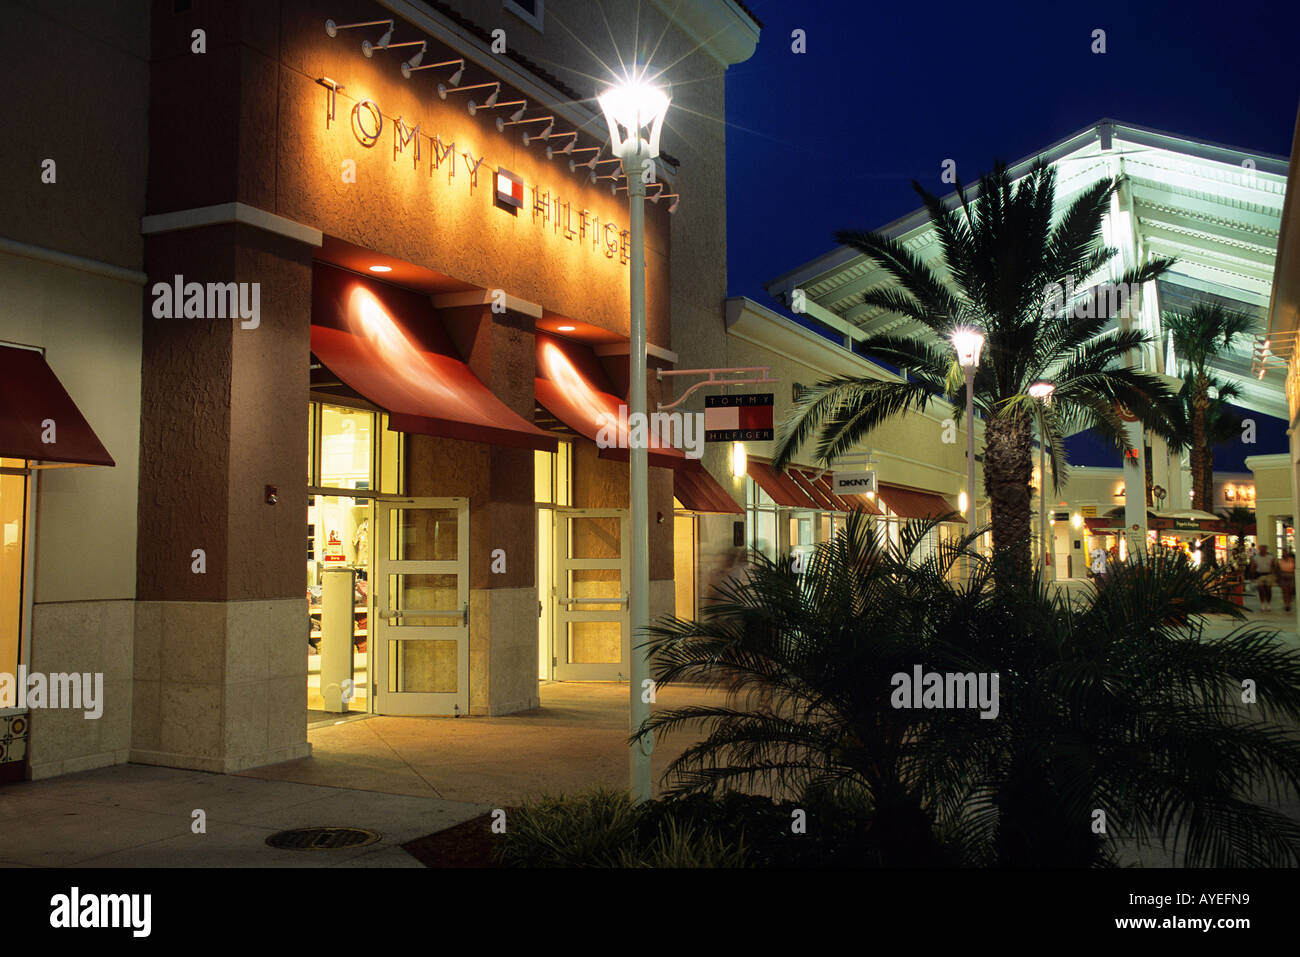 Outlets Shopping Mall at night Orlando Tommy Hilfiger shop Stock Photo - Alamy